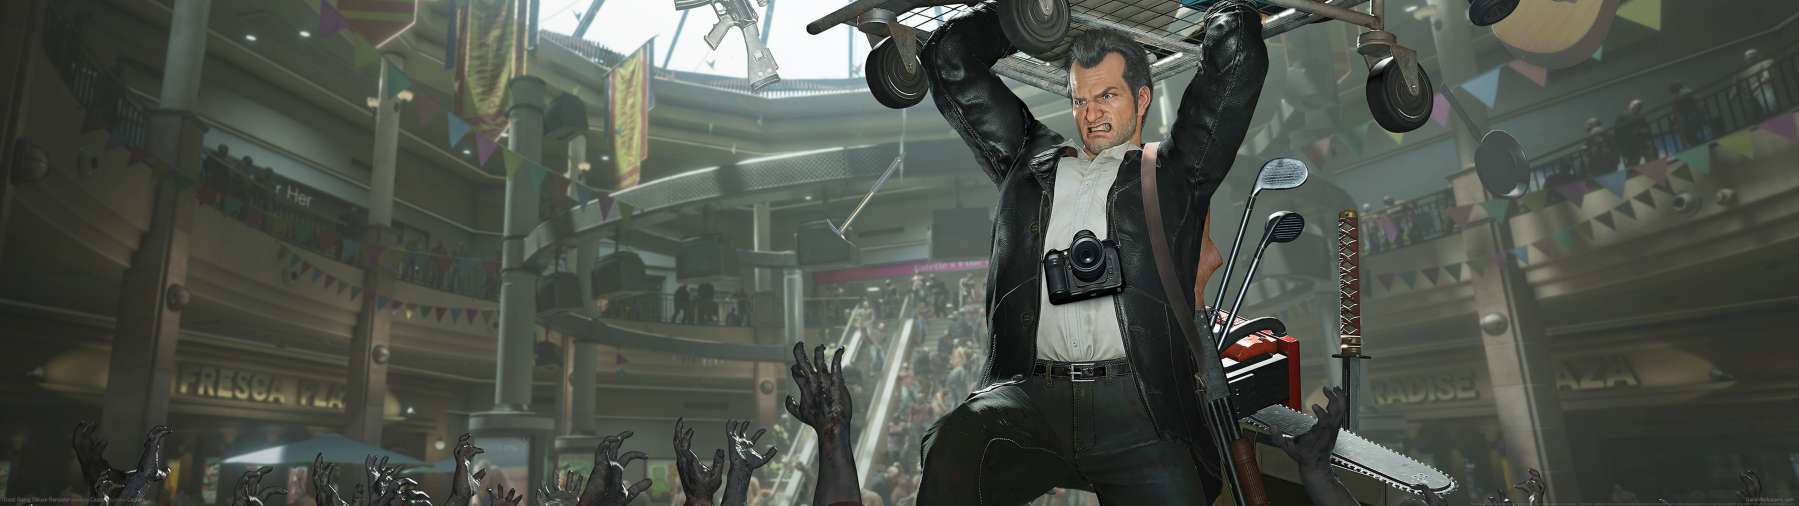 Dead Rising Deluxe Remaster superwide achtergrond 01